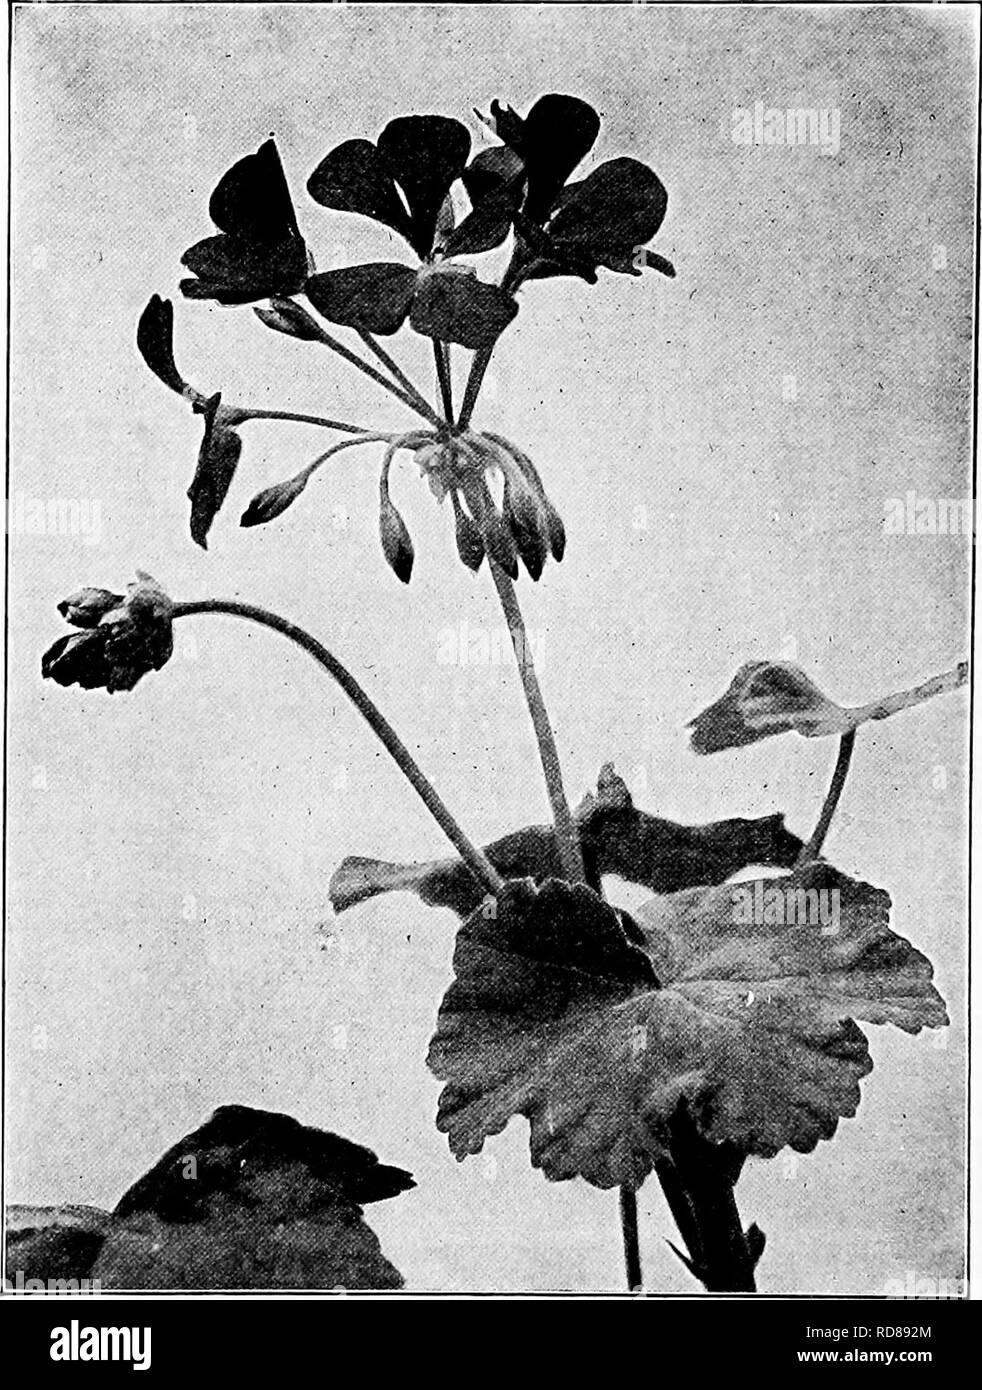 Giving Flowers Black And White Stock Photos Images Page 3 Alamy